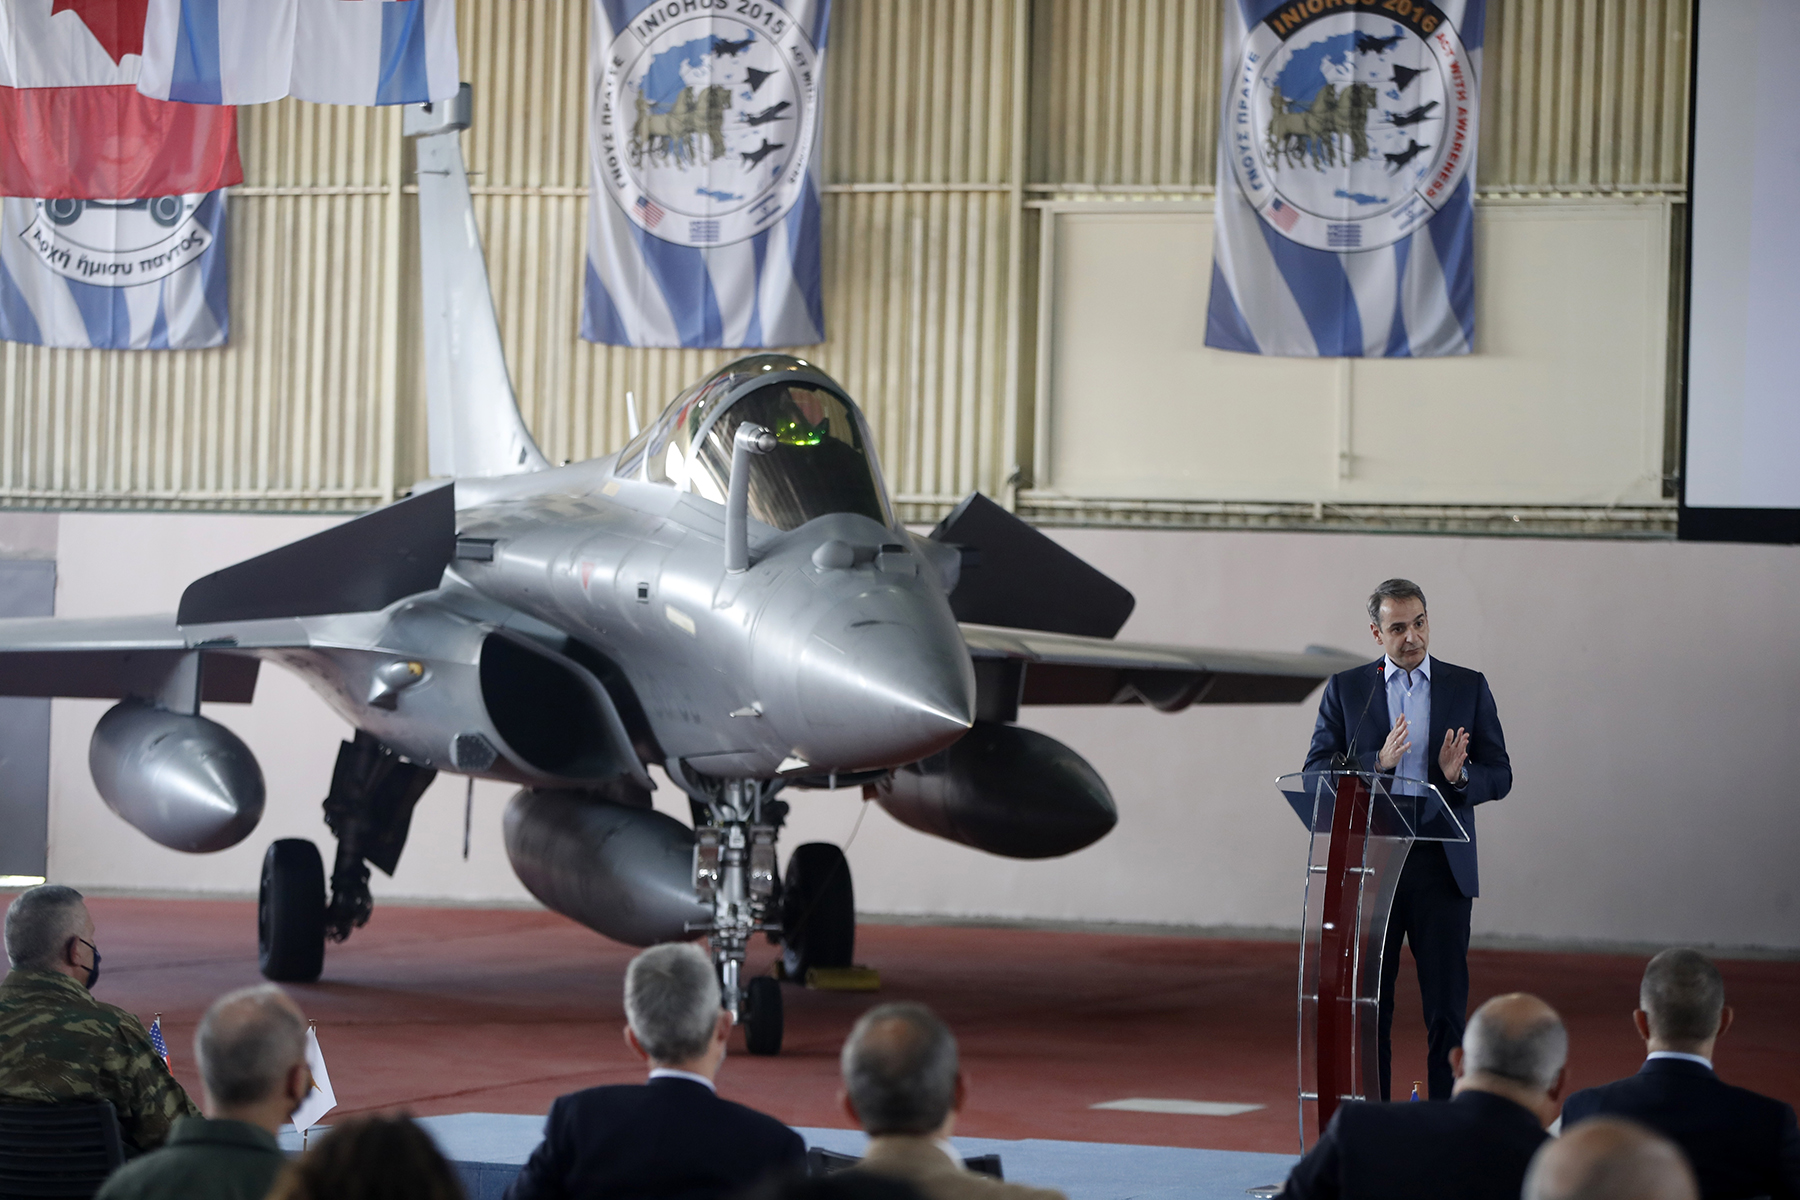 Greece Takes Delivery of 1st of 18 French Rafale Warplanes | Military.com